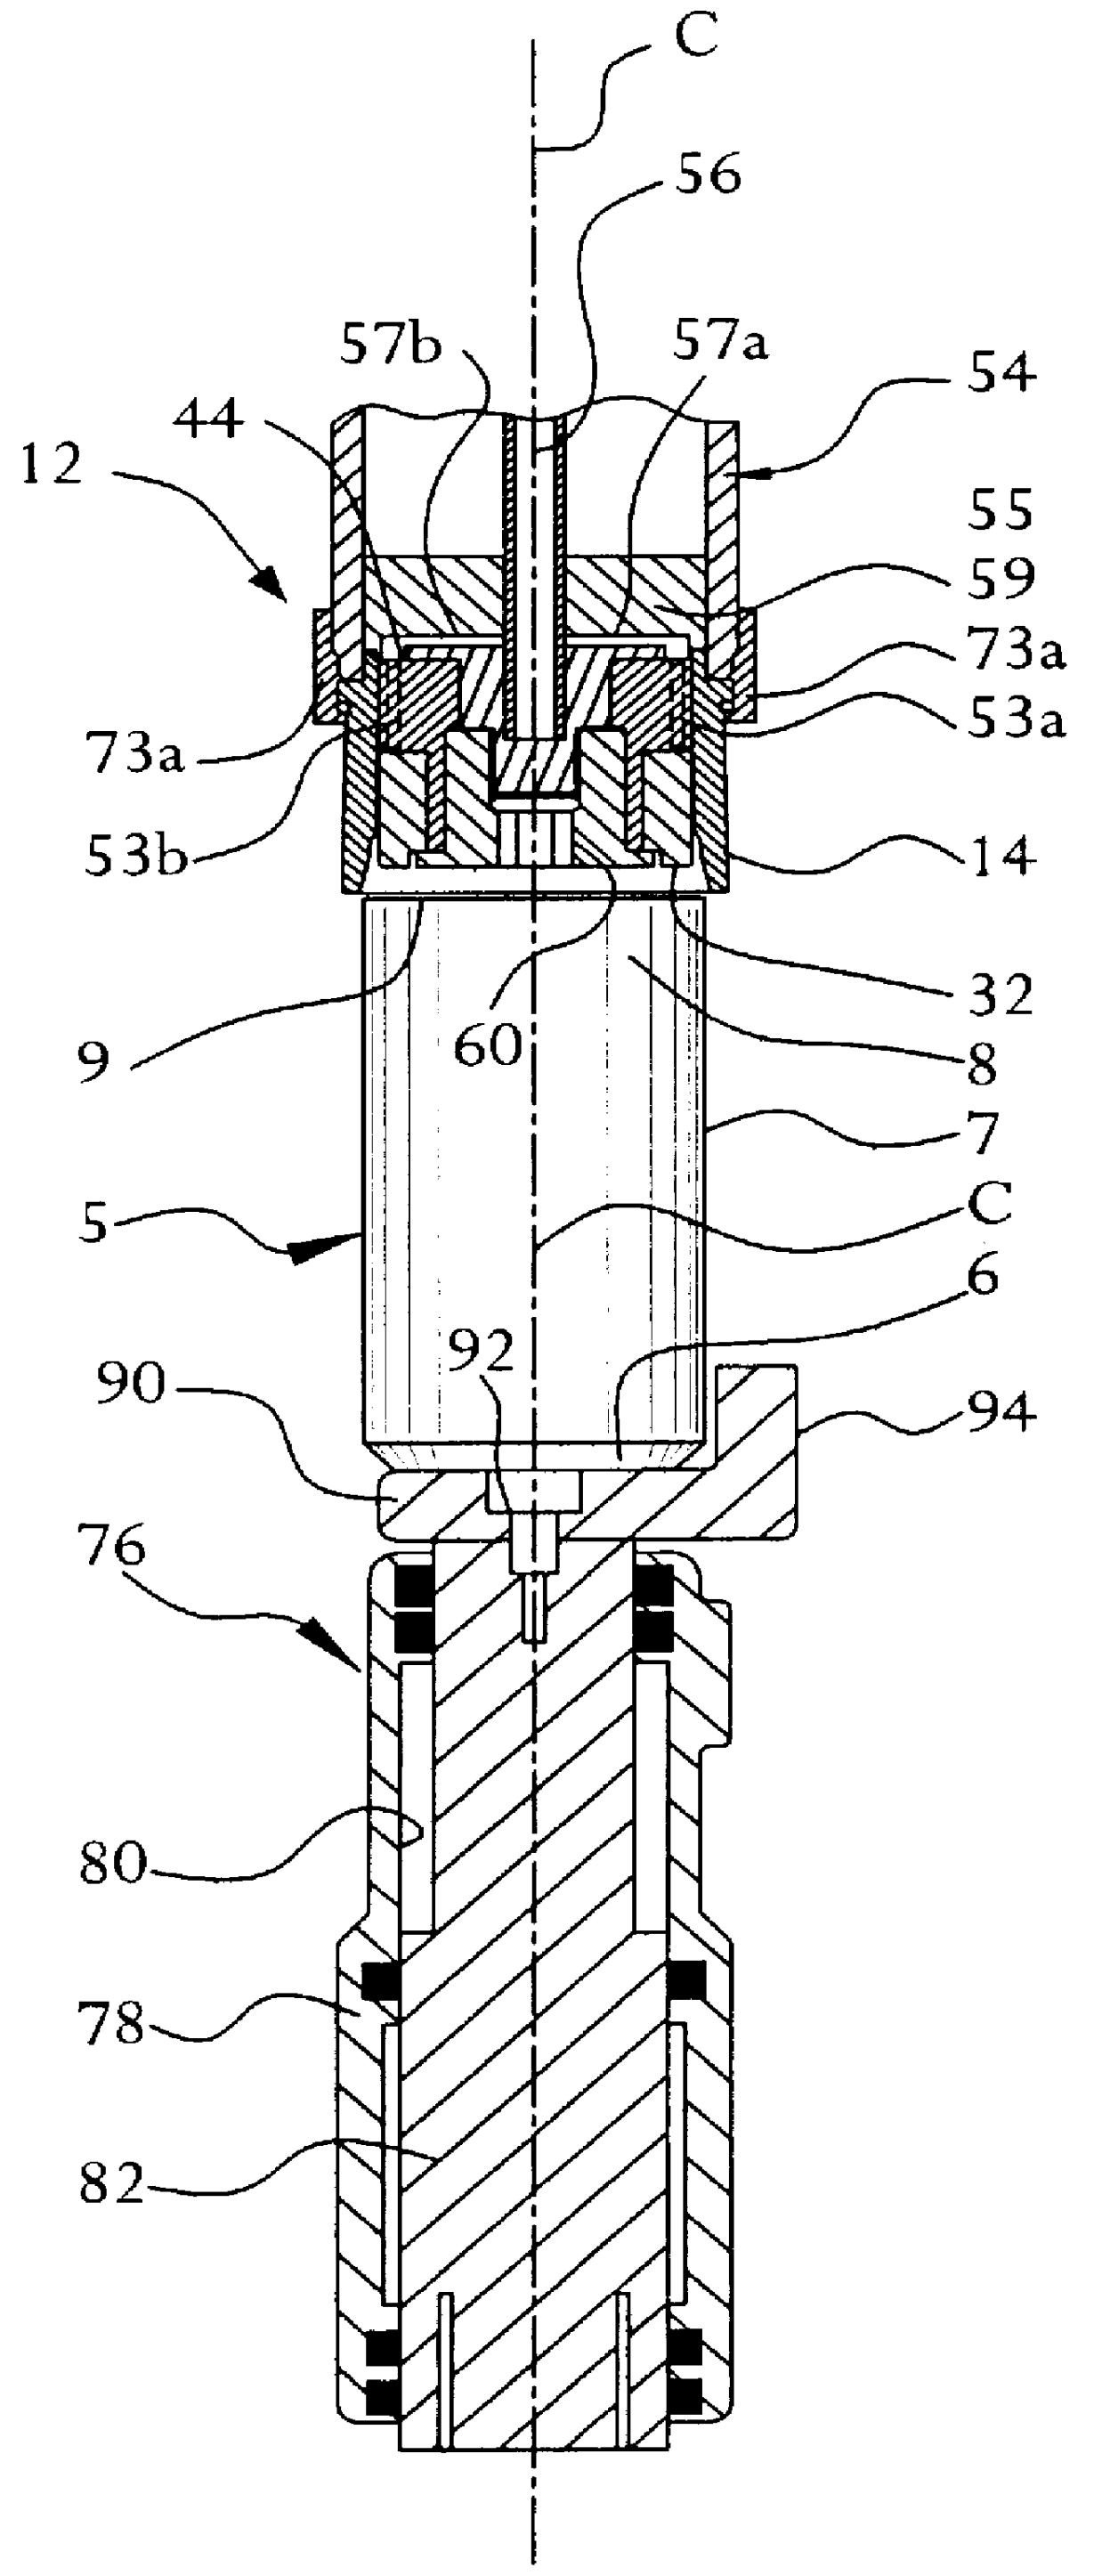 Apparatus and method for necking container ends